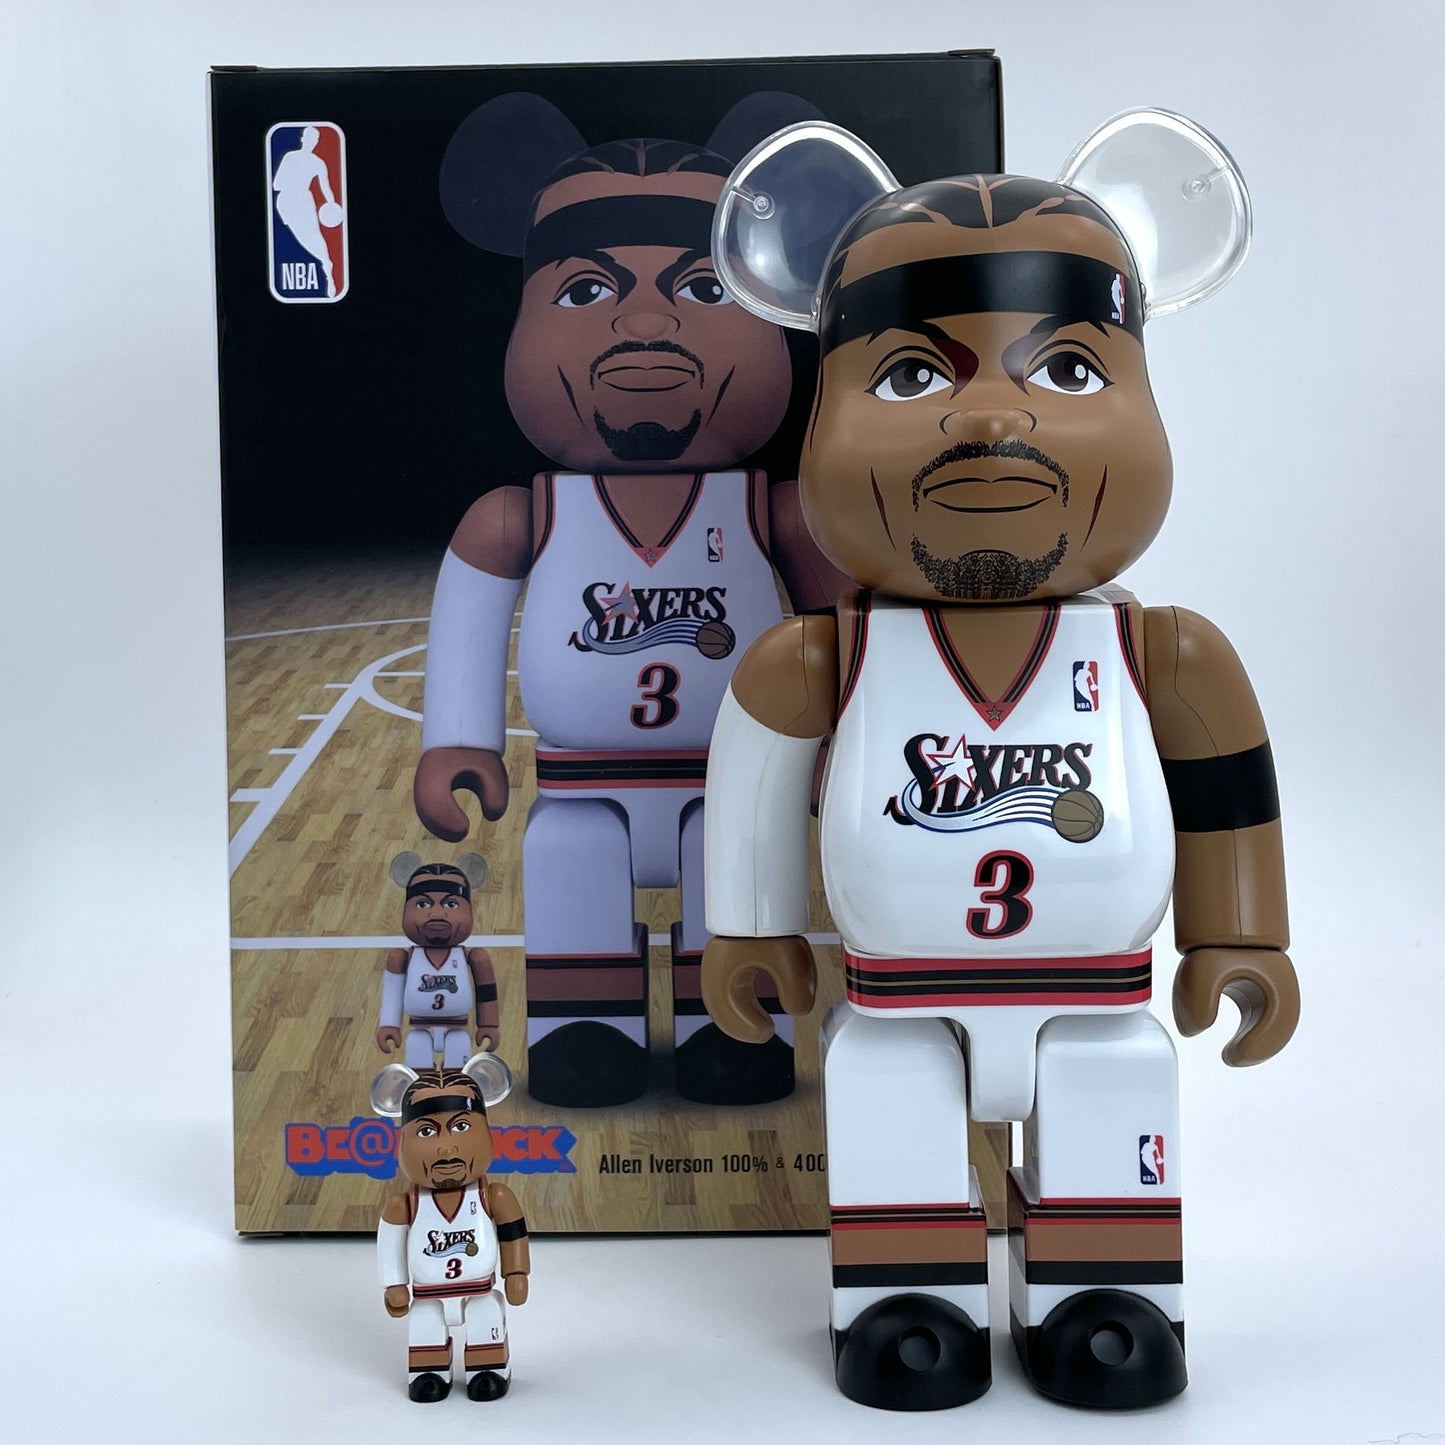 28cm BEARBRICK 400%+100% O'Neal , Iverson ABS Action Figure Boxed